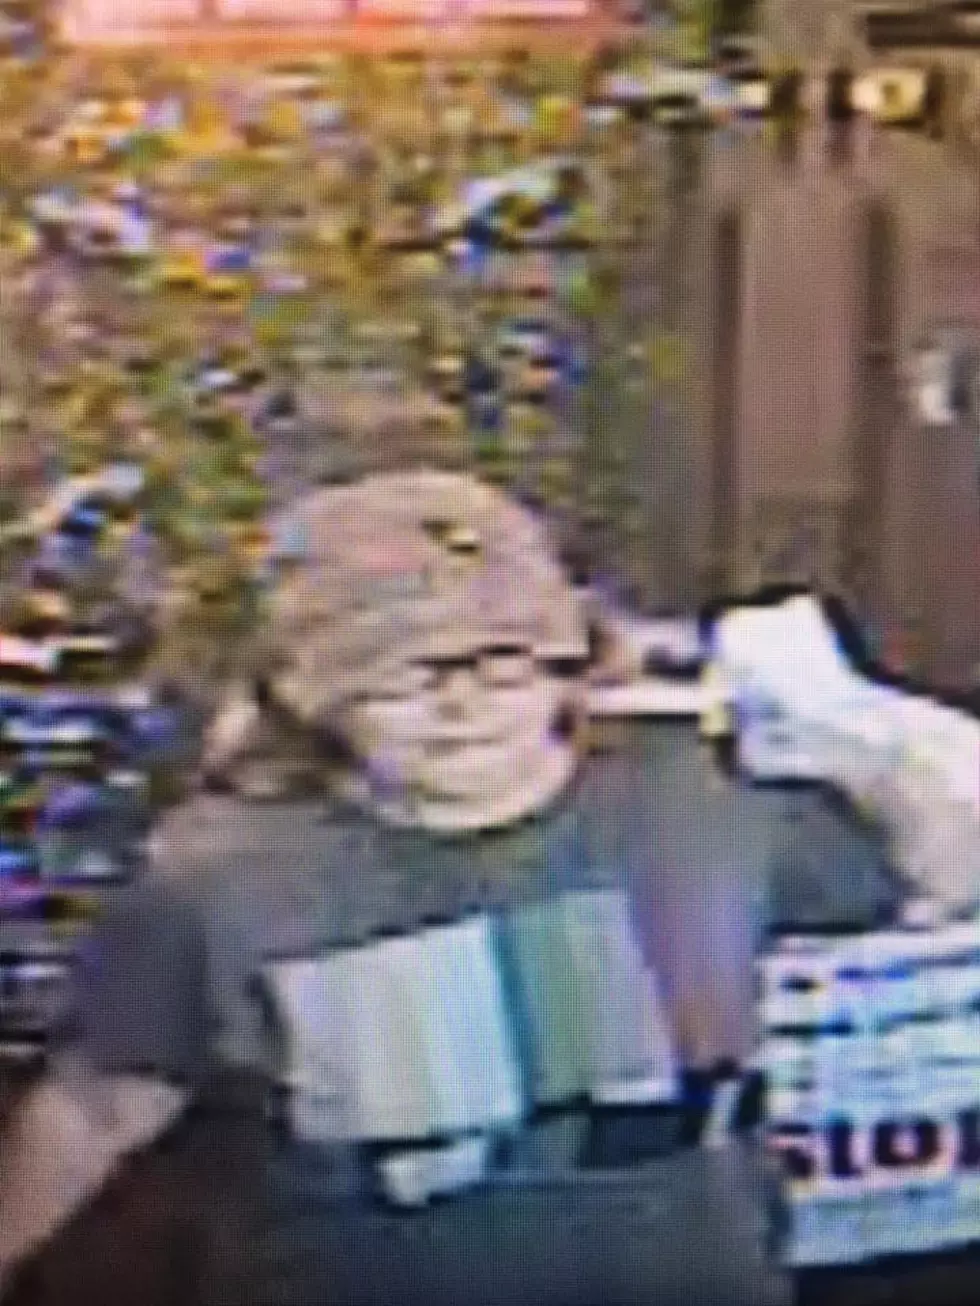 She Stole from a 96-Year-Old Woman! Help Richland PD Find Her!